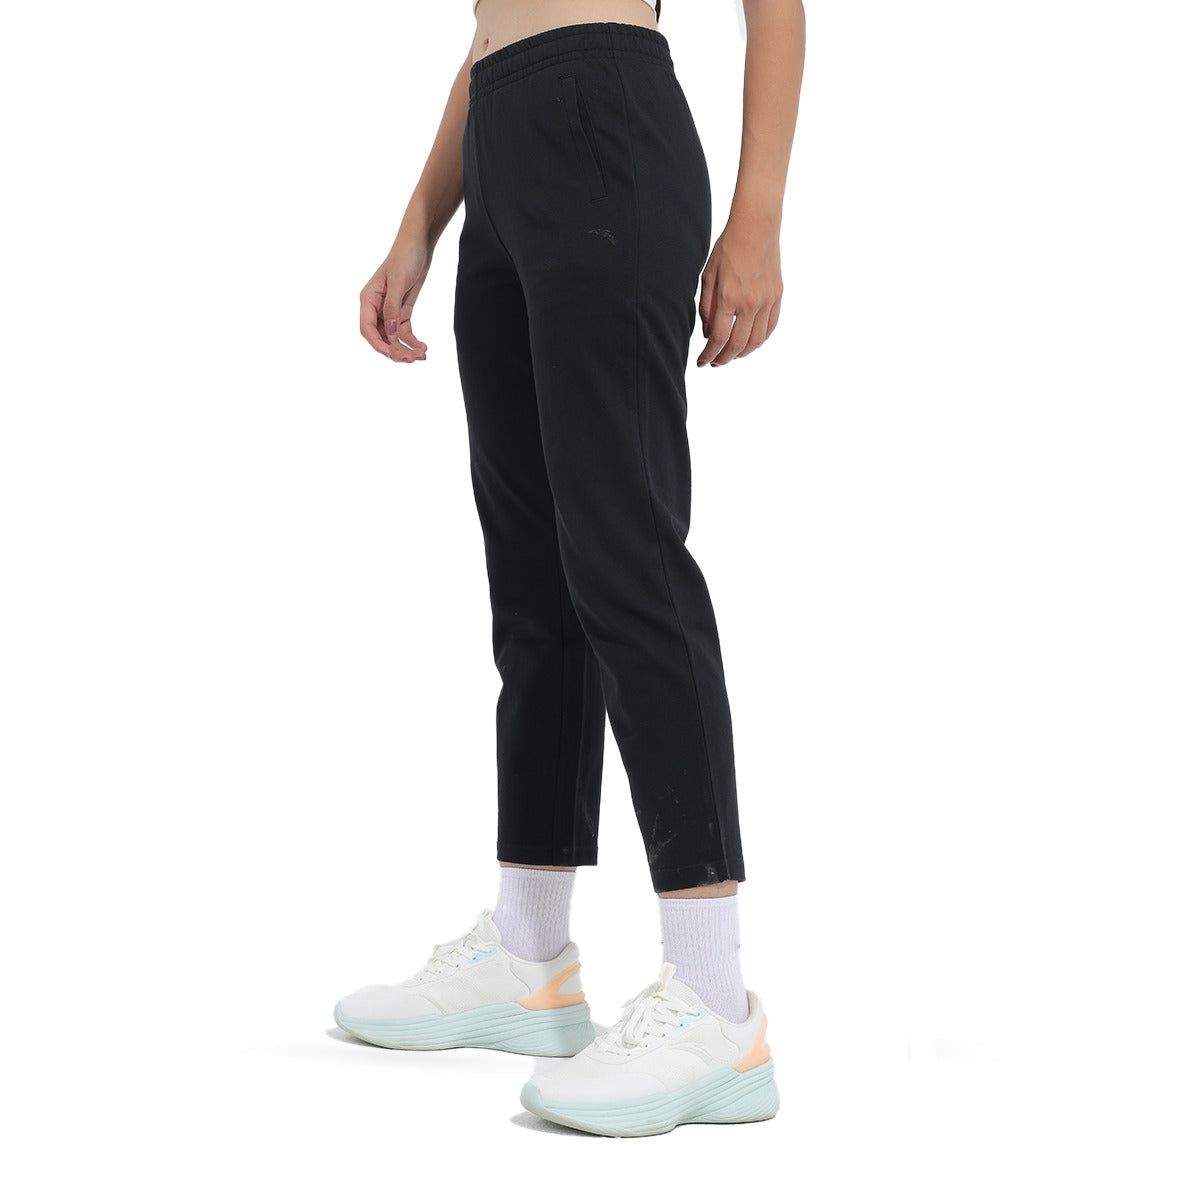 Anta Knit Ankle Casual Pants For Women, Black